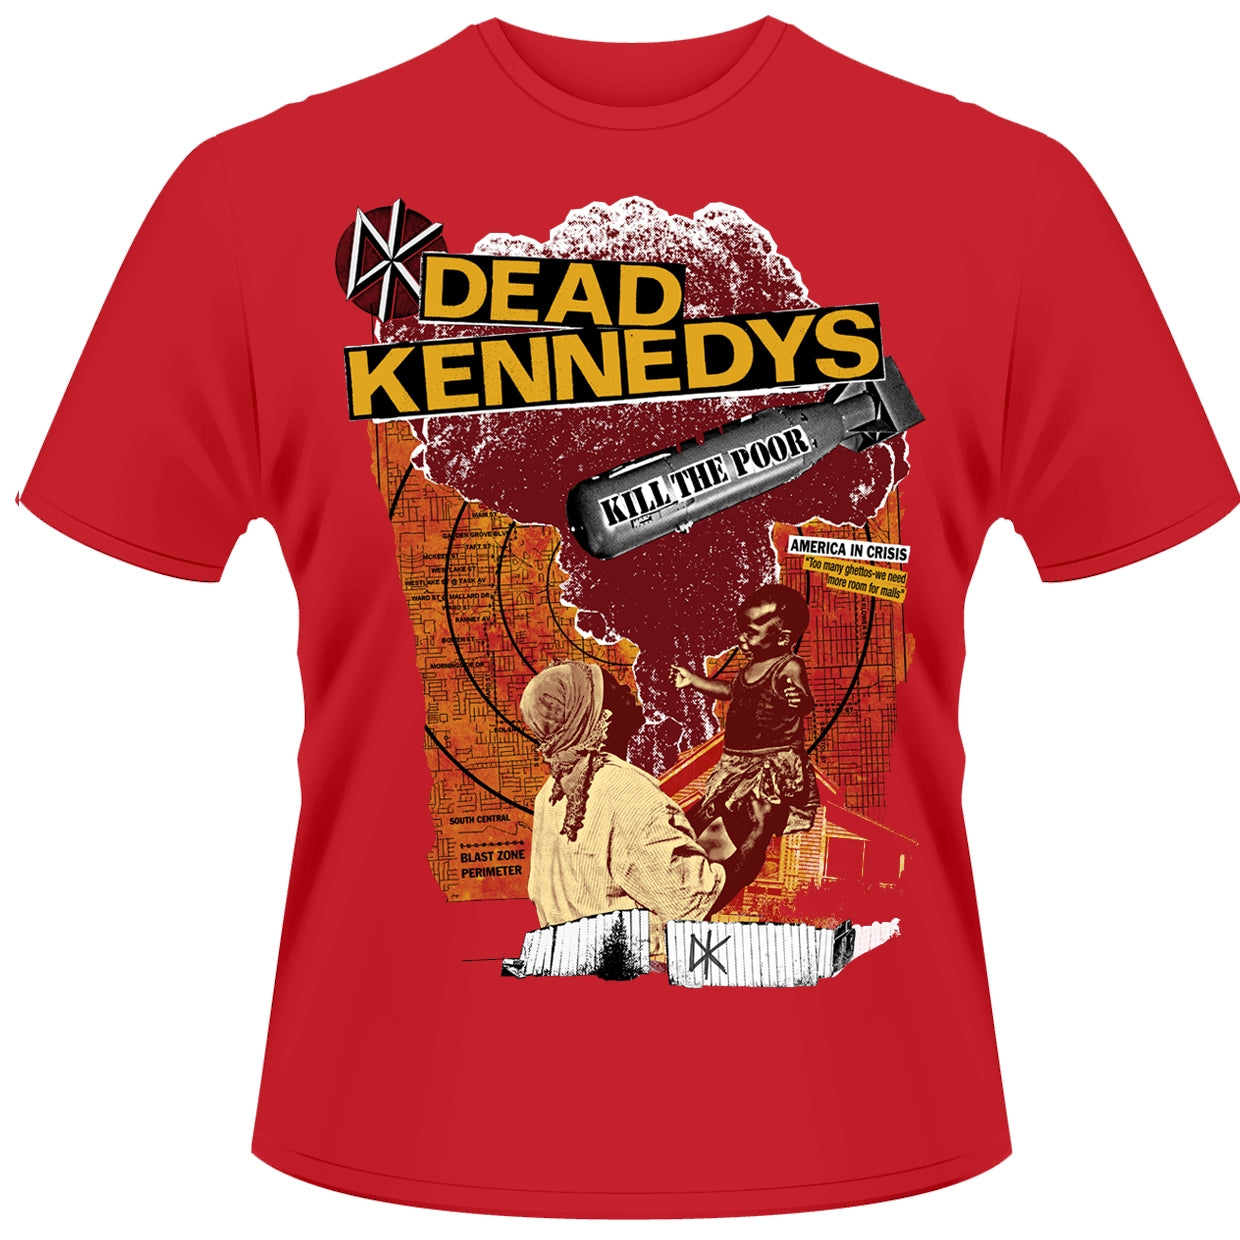 Dead Kennedys "Kill The Poor" Red T shirt